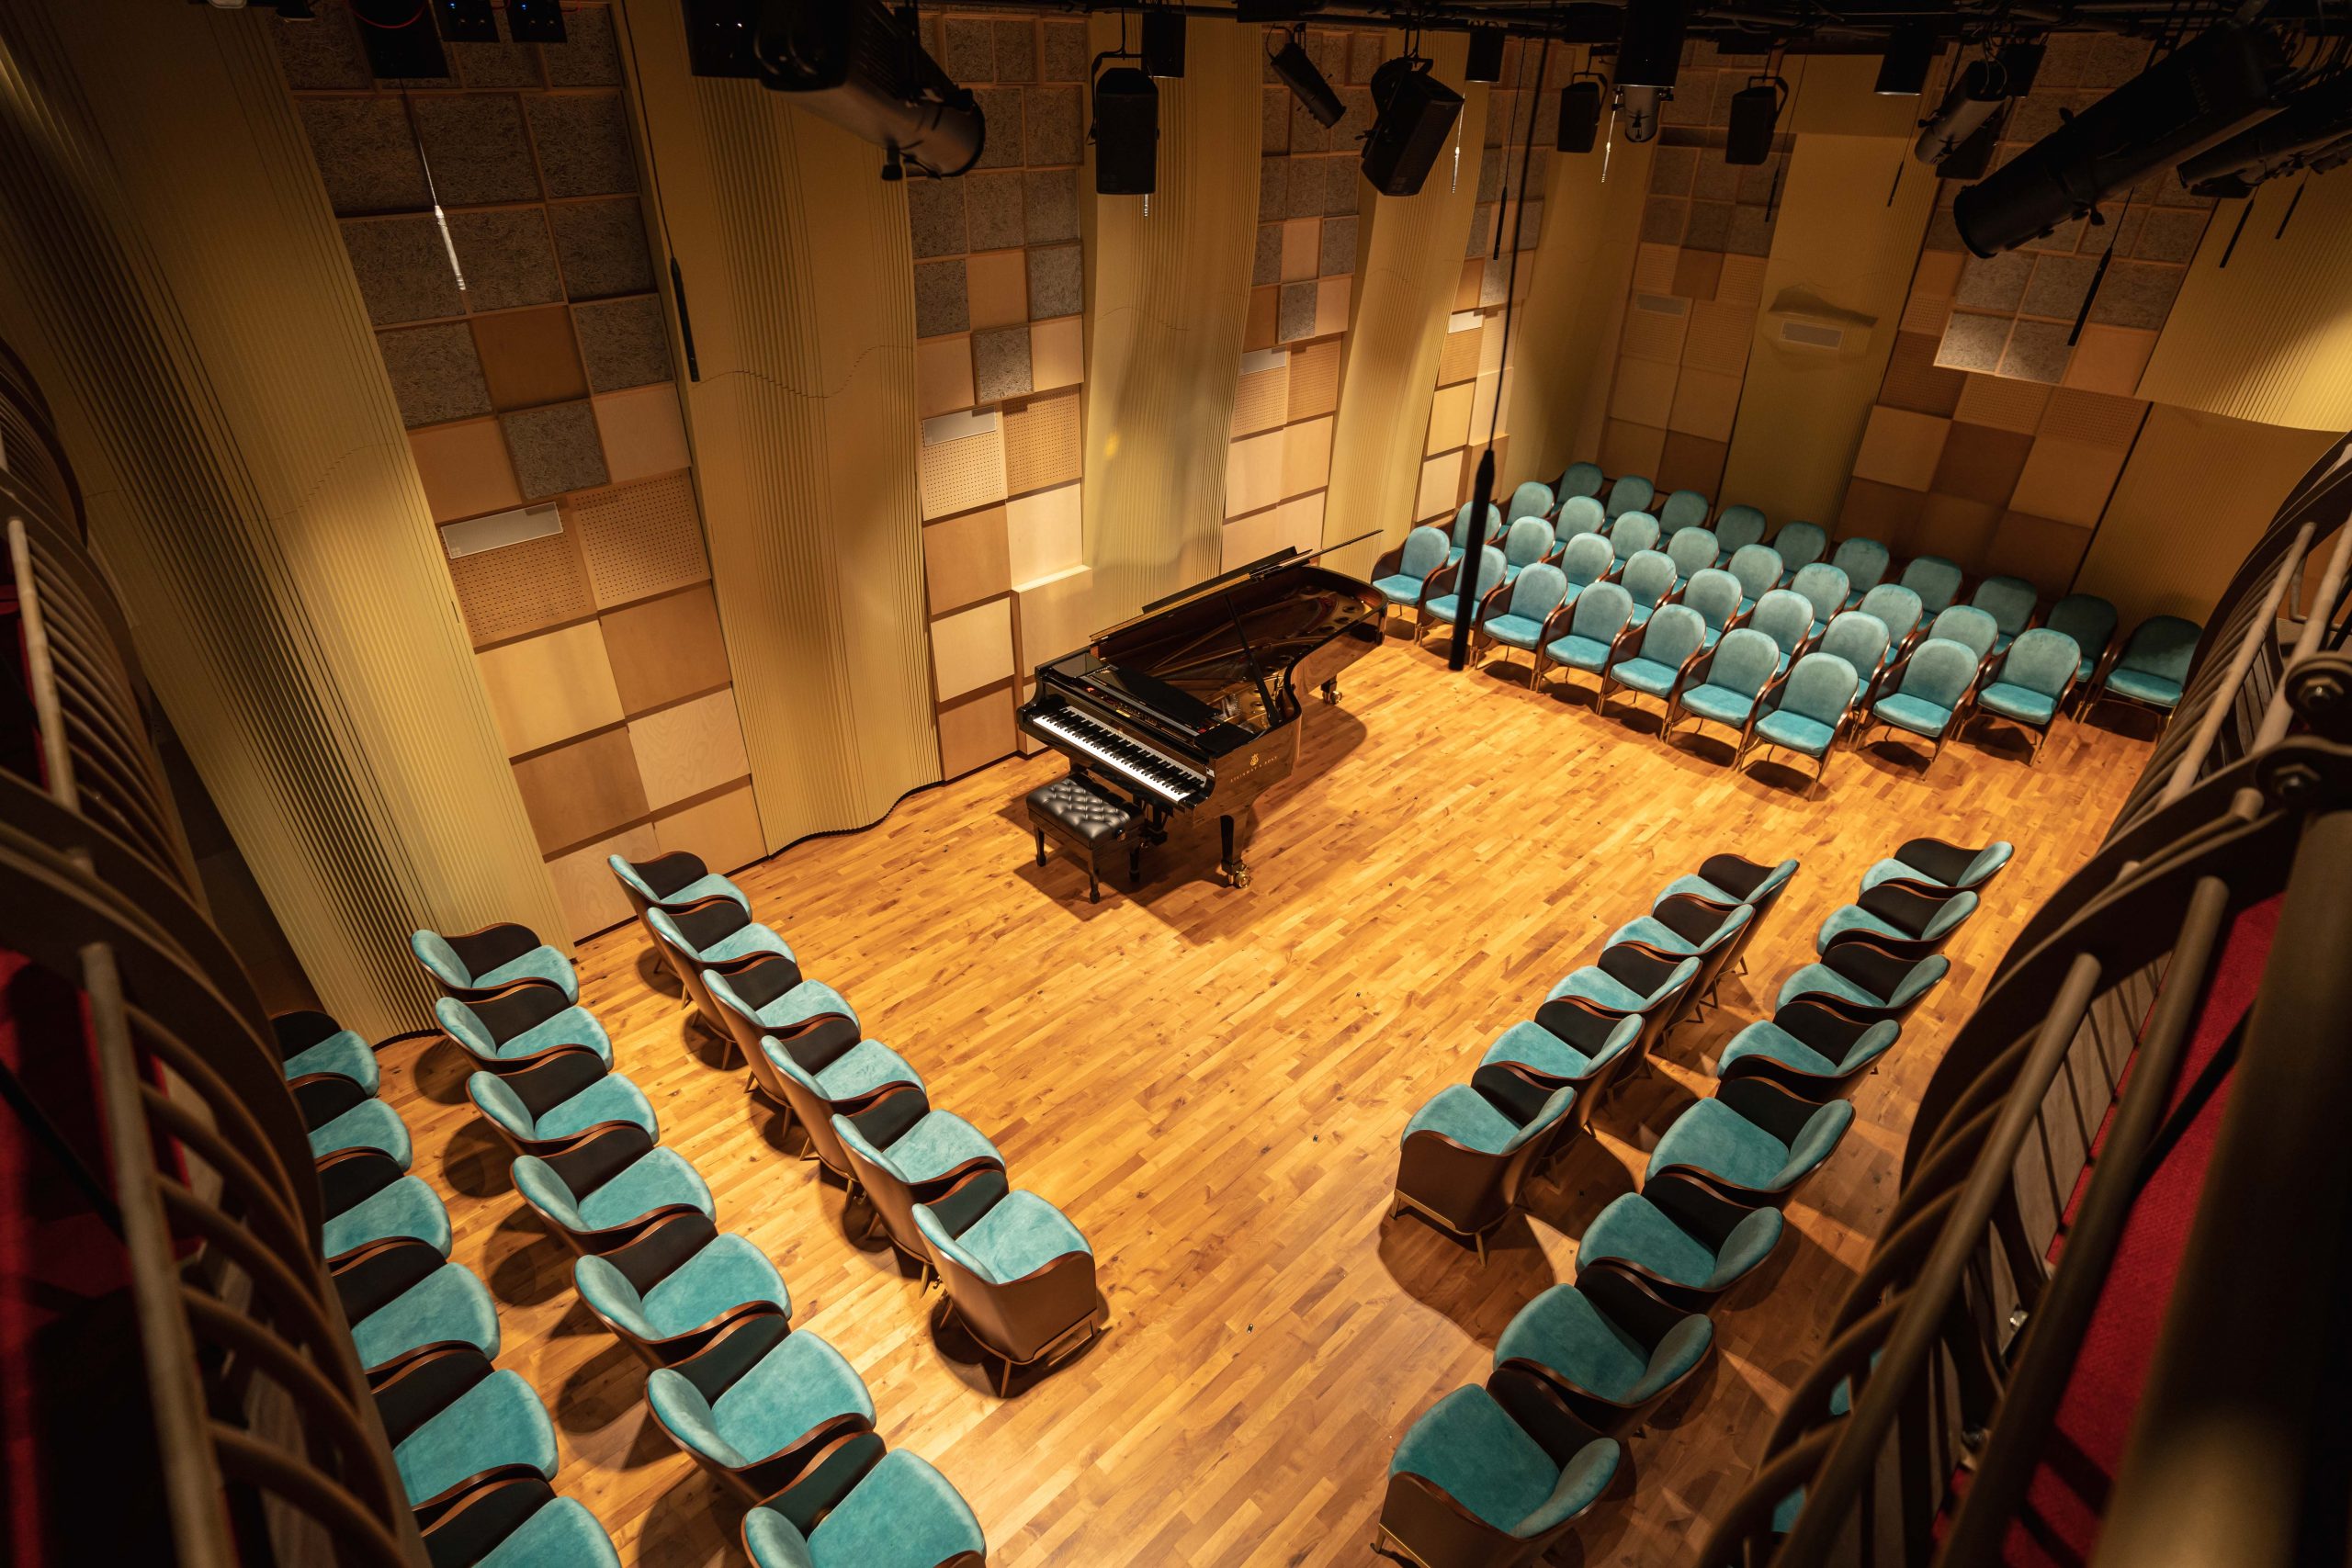 Concert hall seats laid out around a grand piano, shot taken from a balcony above